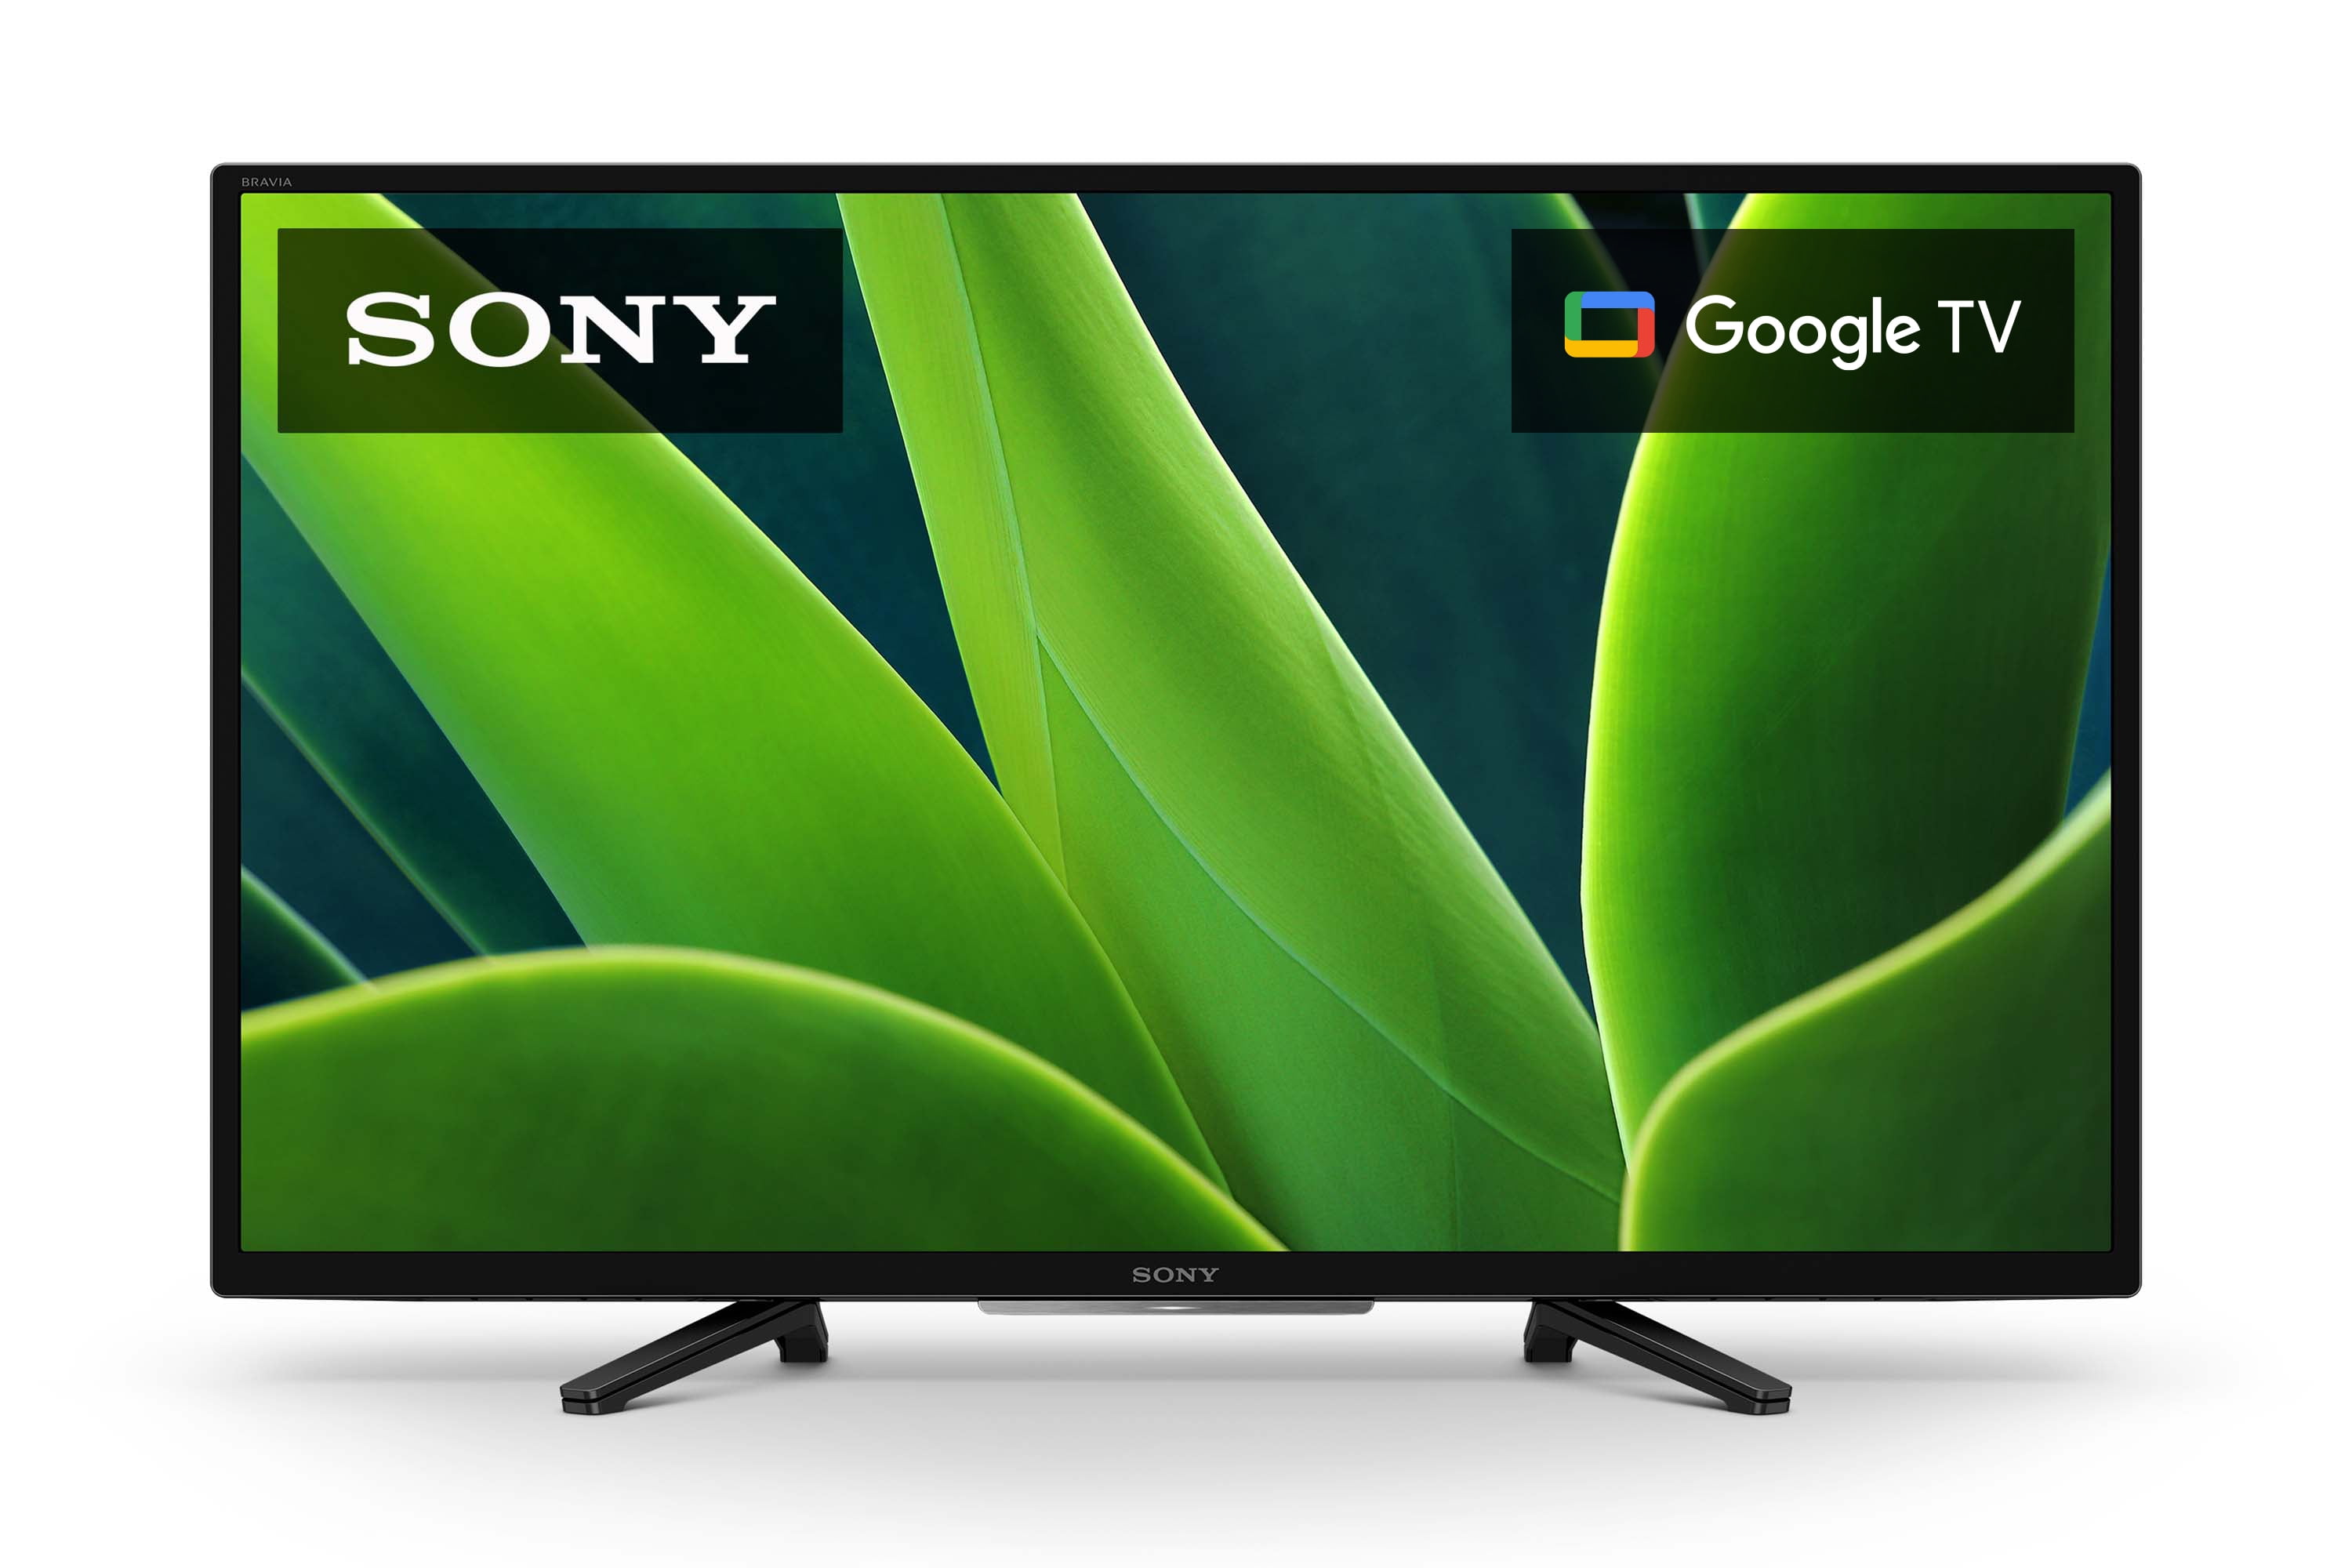 Restored Sony 32” W830K 720p HD LED HDR TV with Google TV and Google Assistant-2022 Model (Refurbished) - Walmart.com